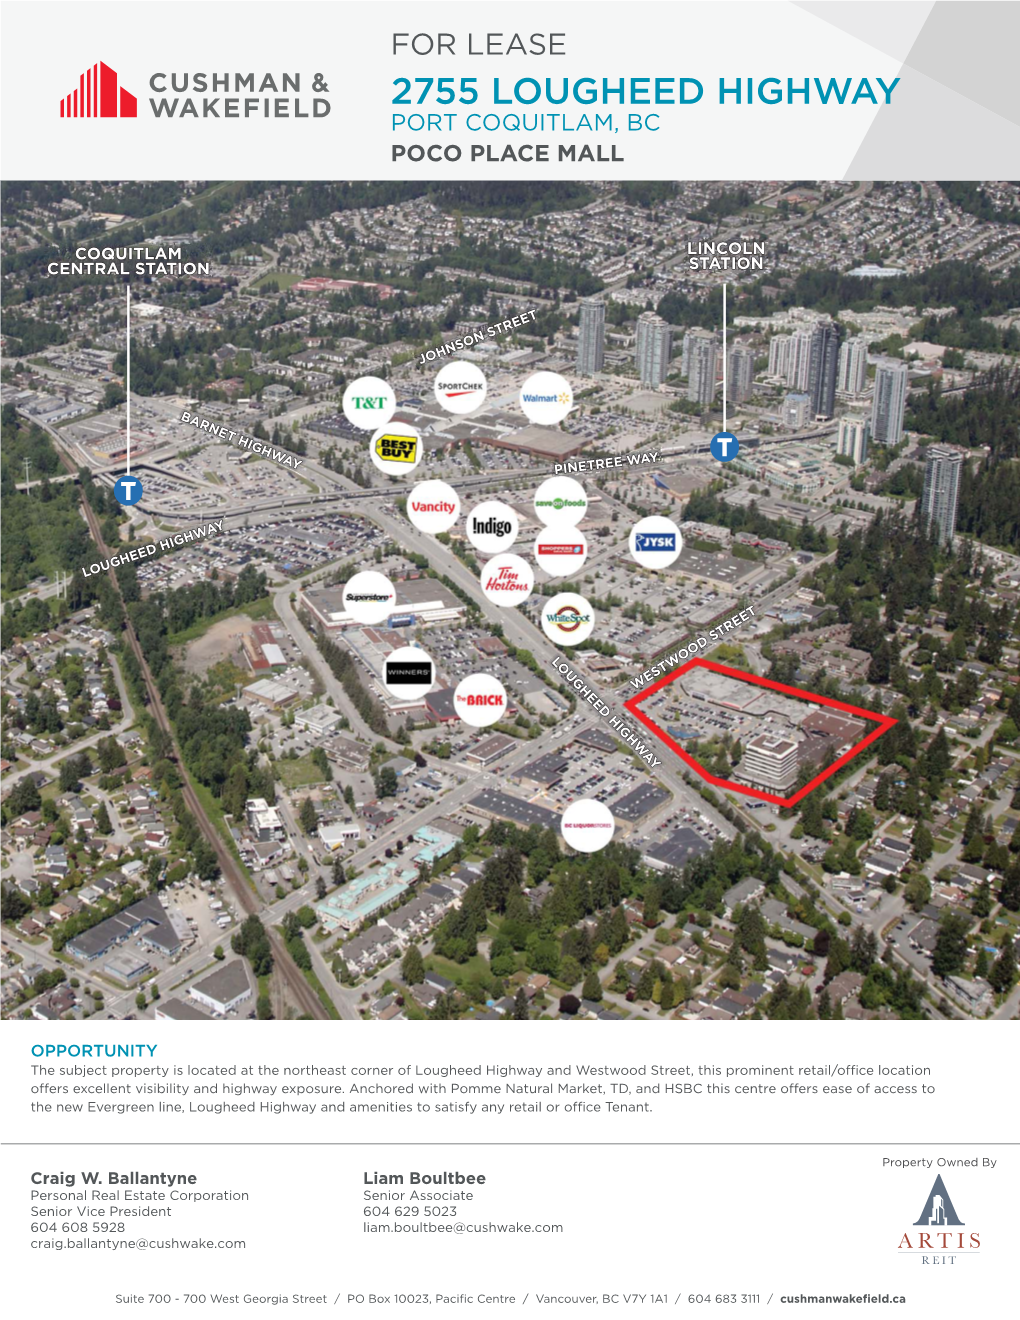 For Lease 2755 Lougheed Highway Port Coquitlam, Bc Poco Place Mall